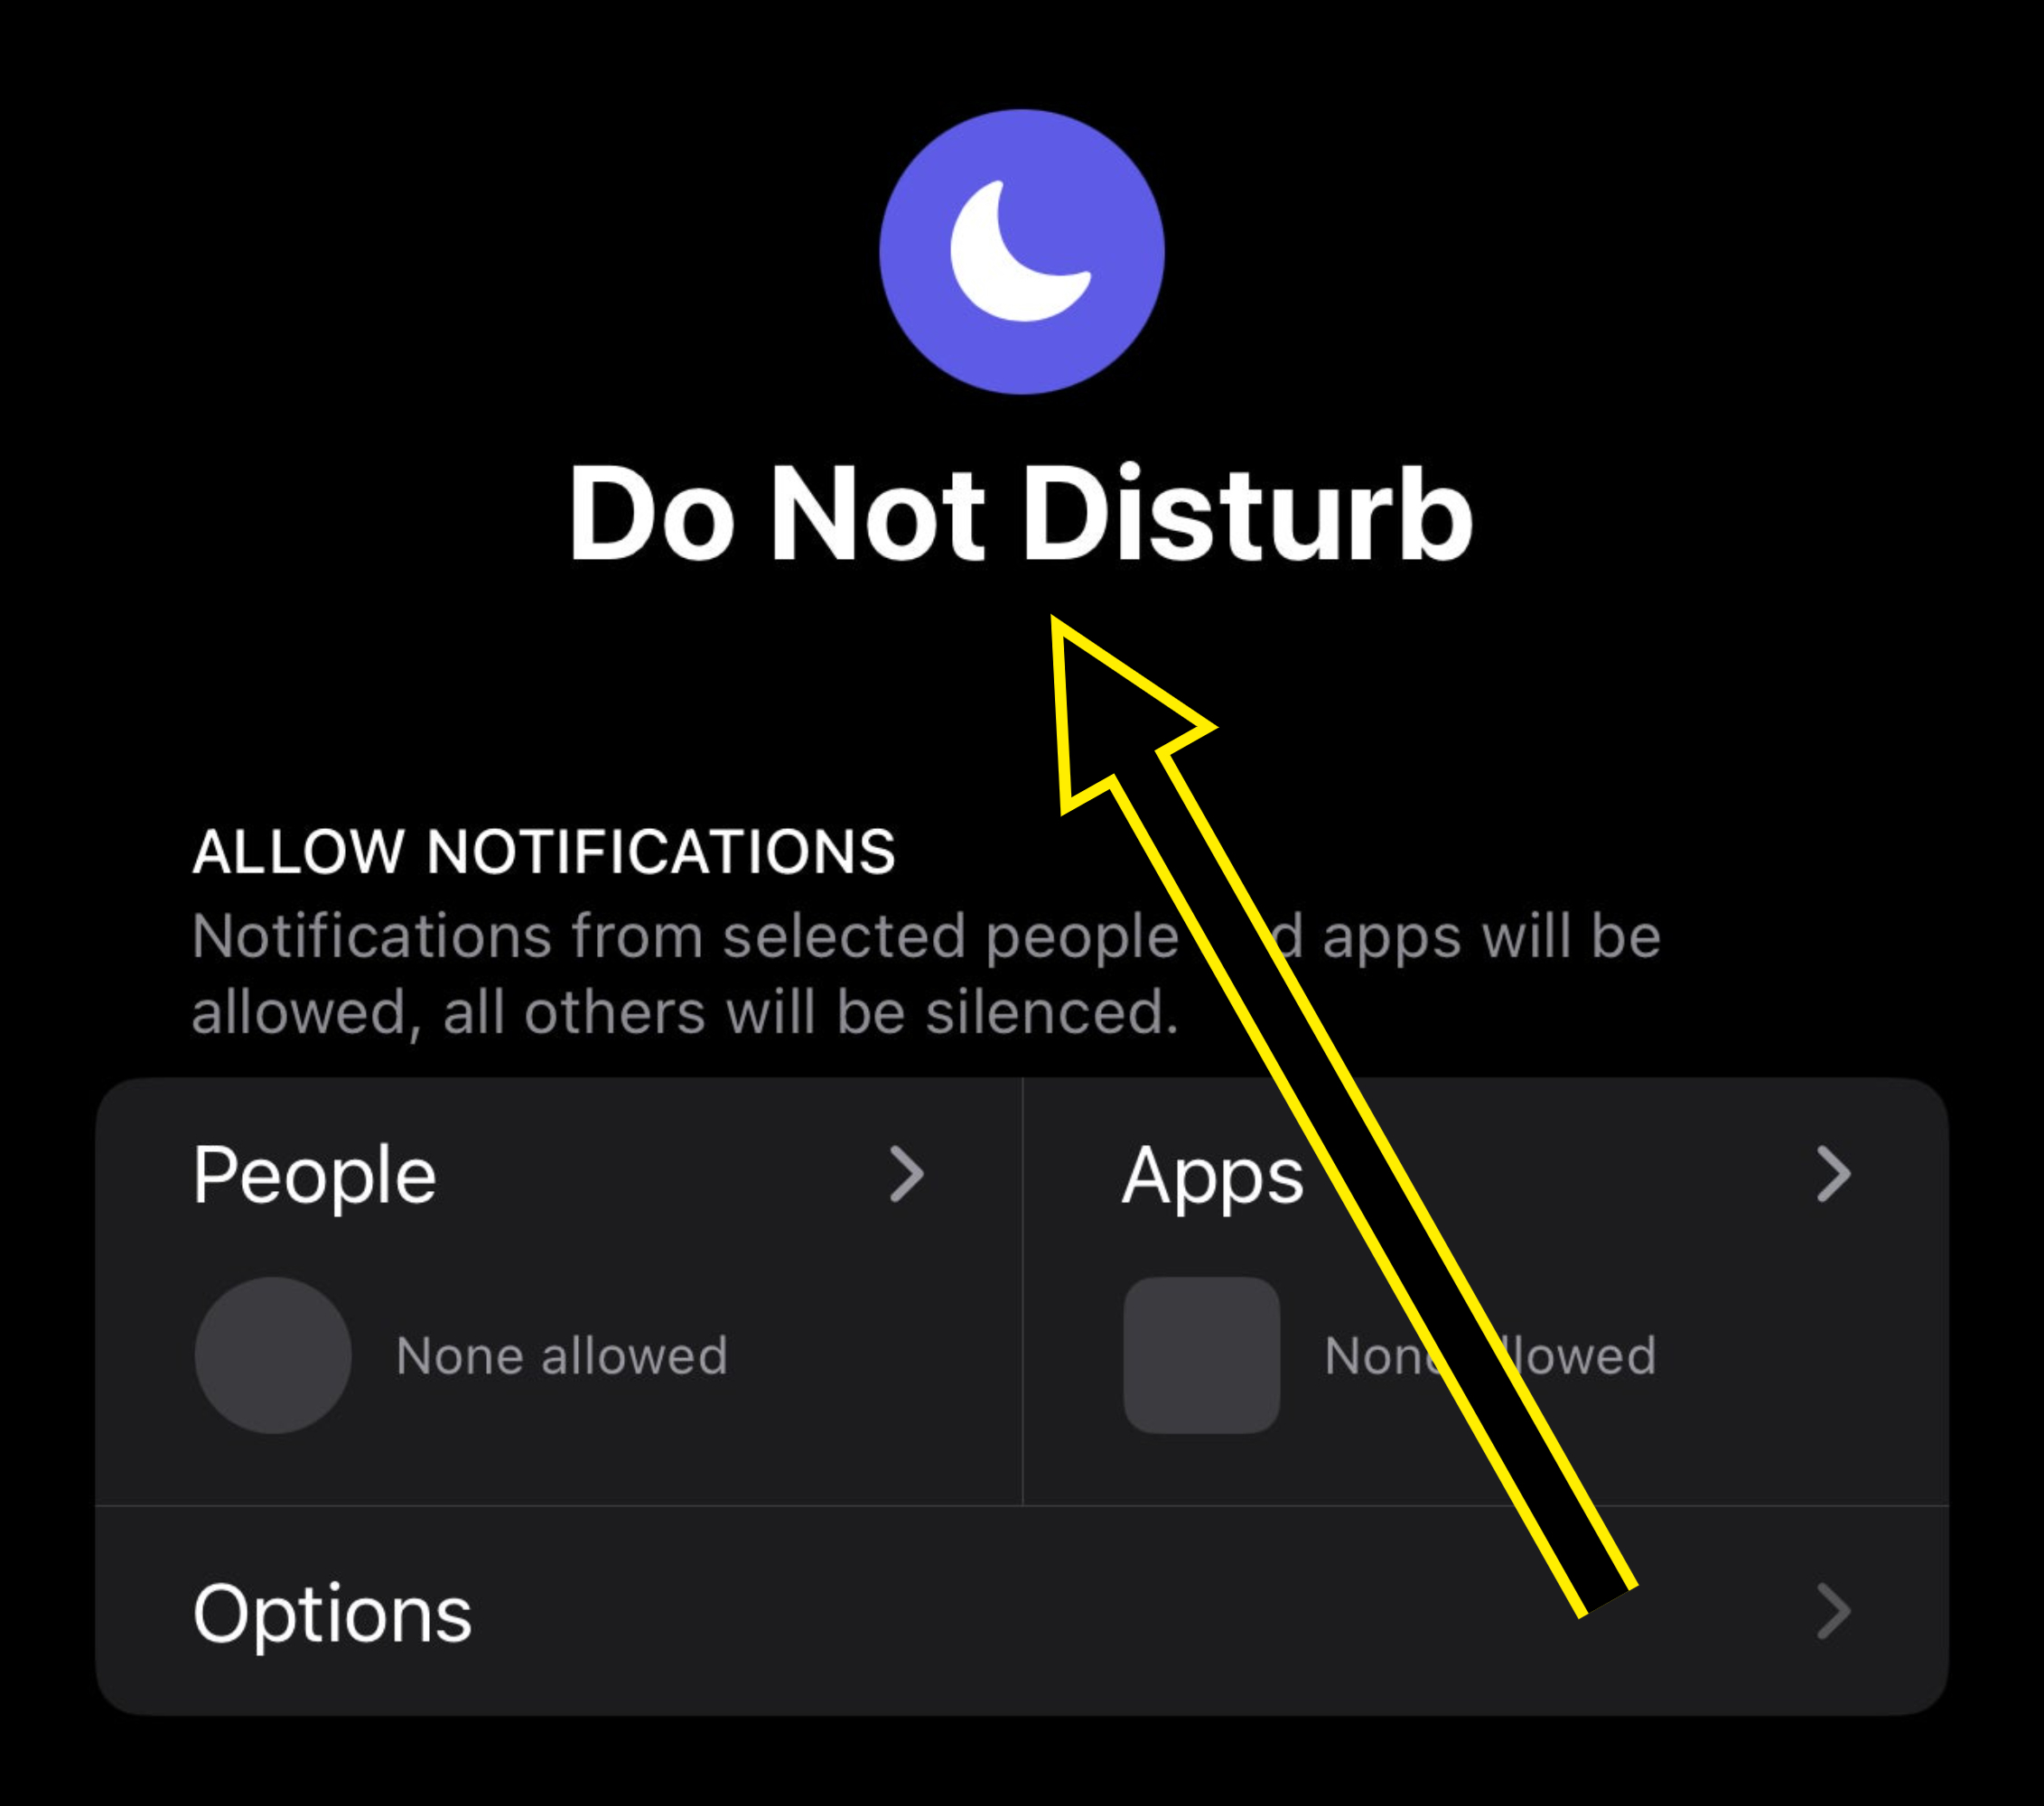 Screenshot of a smartphone Do Not Disturb setting with options to allow notifications from selected people and apps